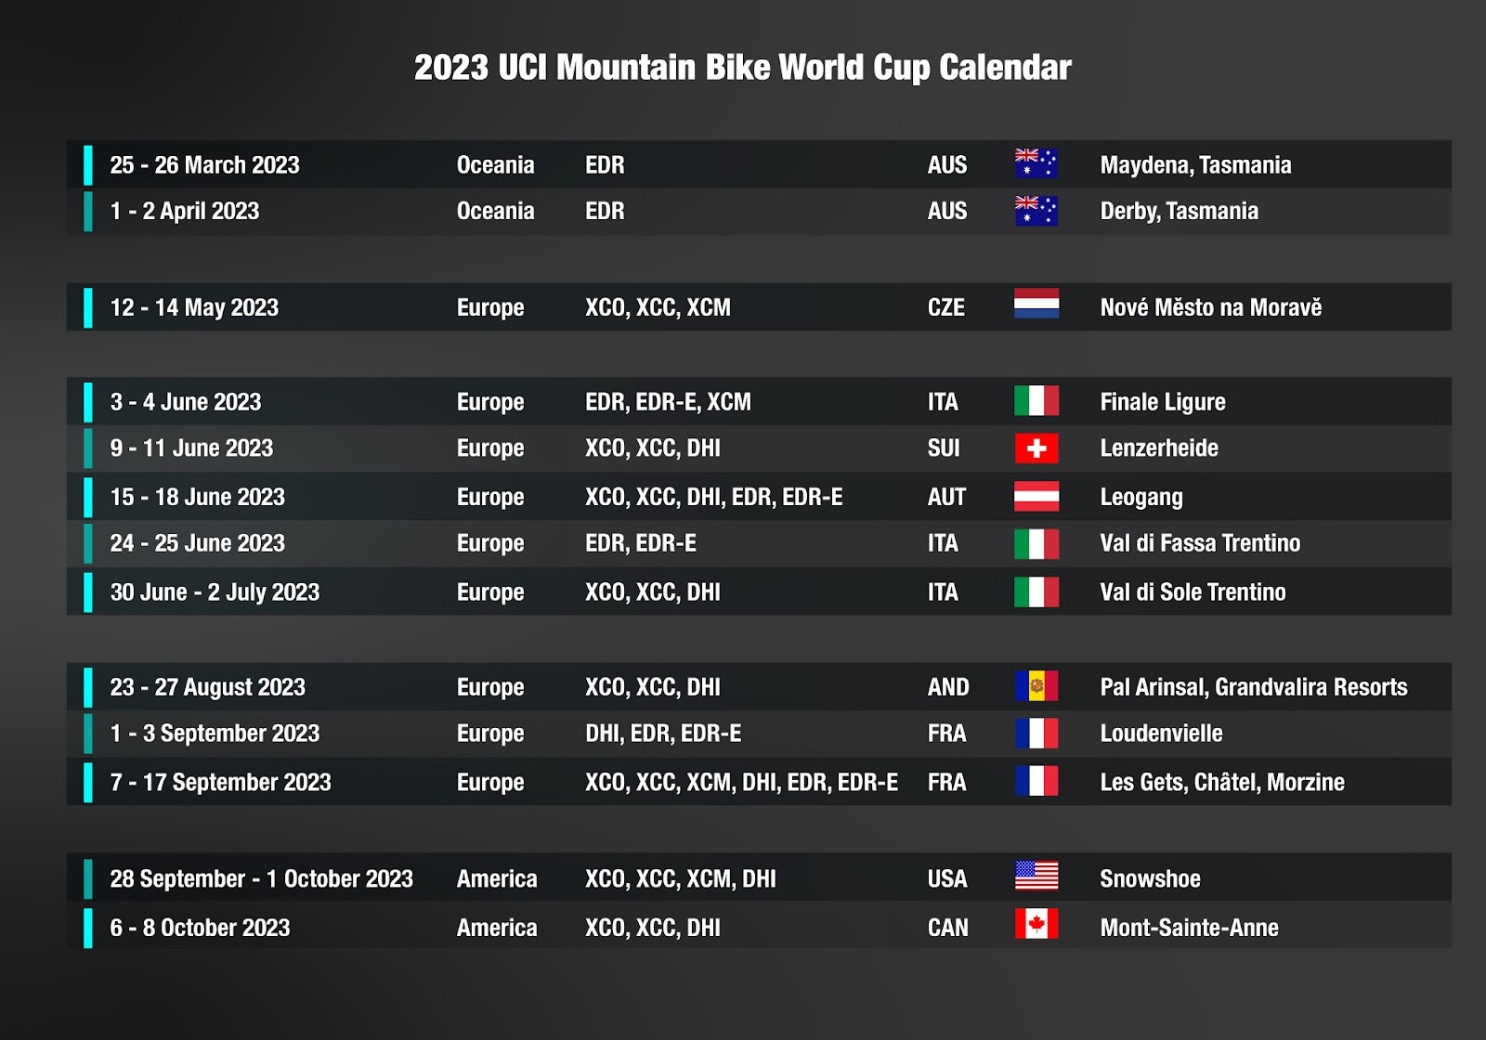 MTB Calendar 2023 dates and venues for UCI World Cup and World